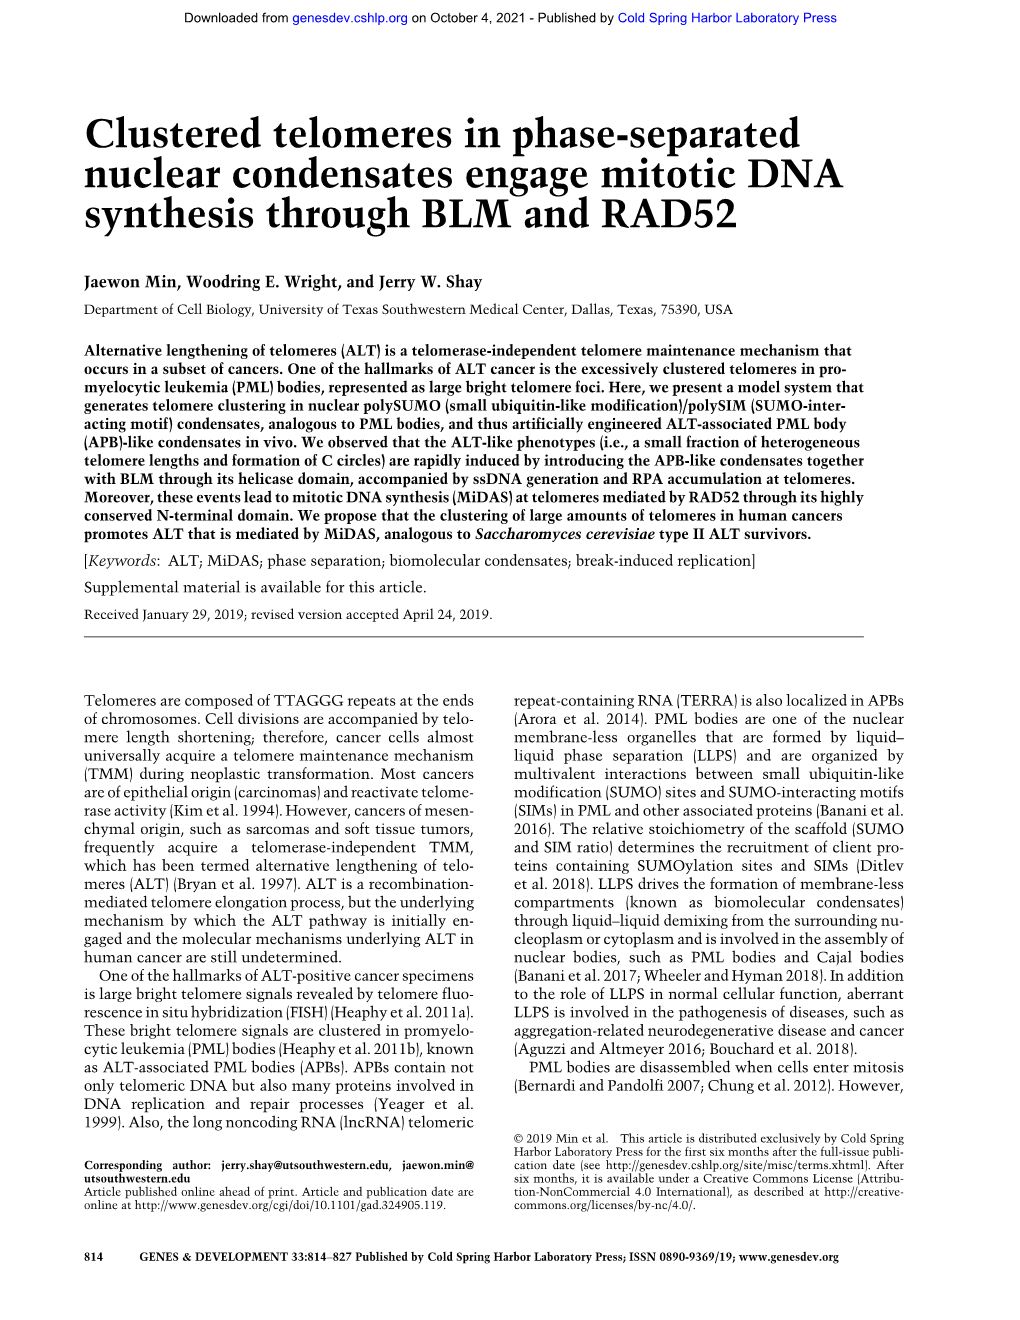 Clustered Telomeres in Phase-Separated Nuclear Condensates Engage Mitotic DNA Synthesis Through BLM and RAD52